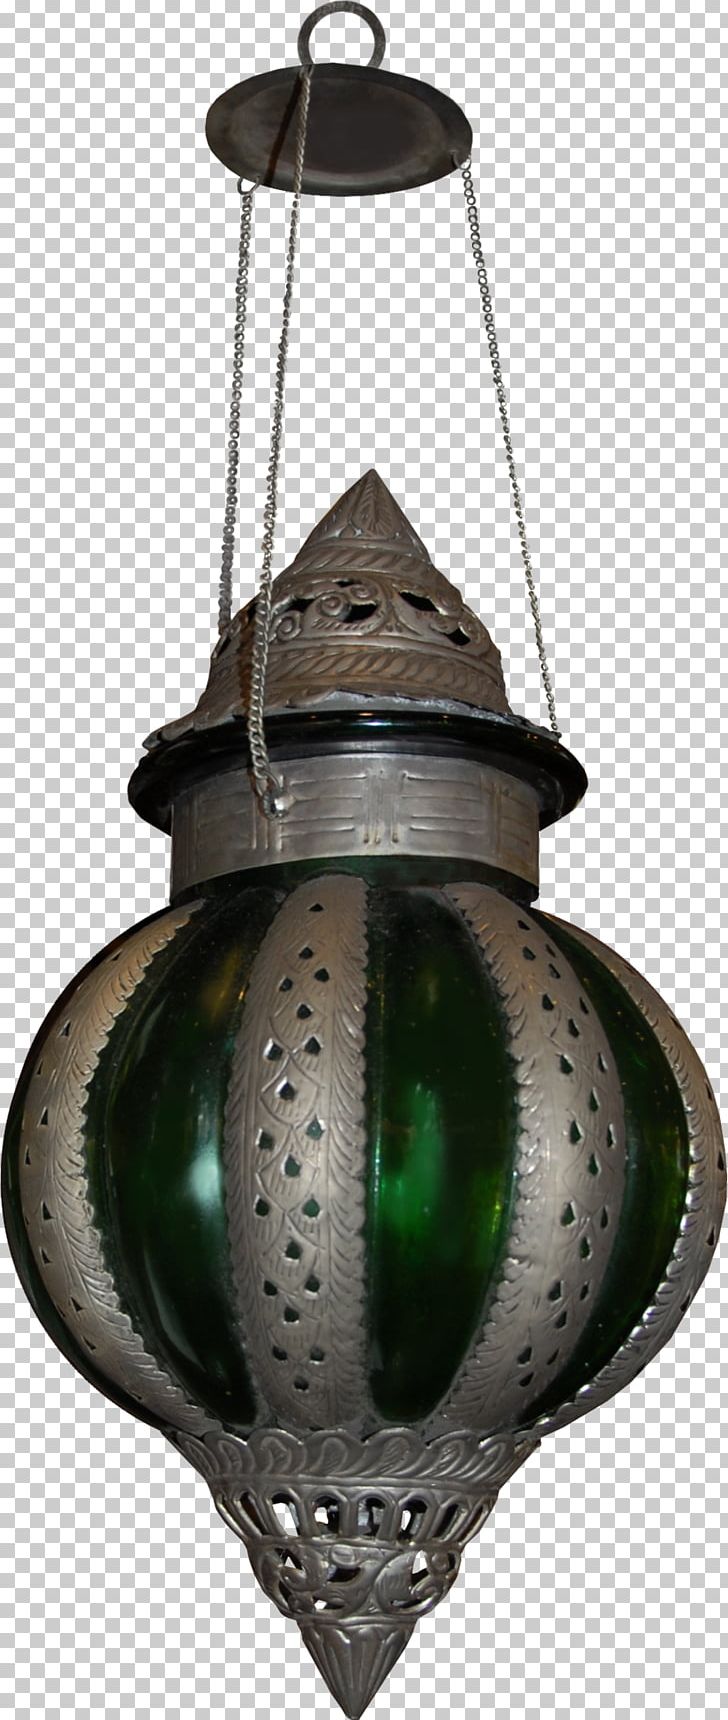 Lighting Lantern Light Fixture Street Light PNG, Clipart, Candle, Ceiling Fixture, Electric Light, Electronics, Flashlight Free PNG Download